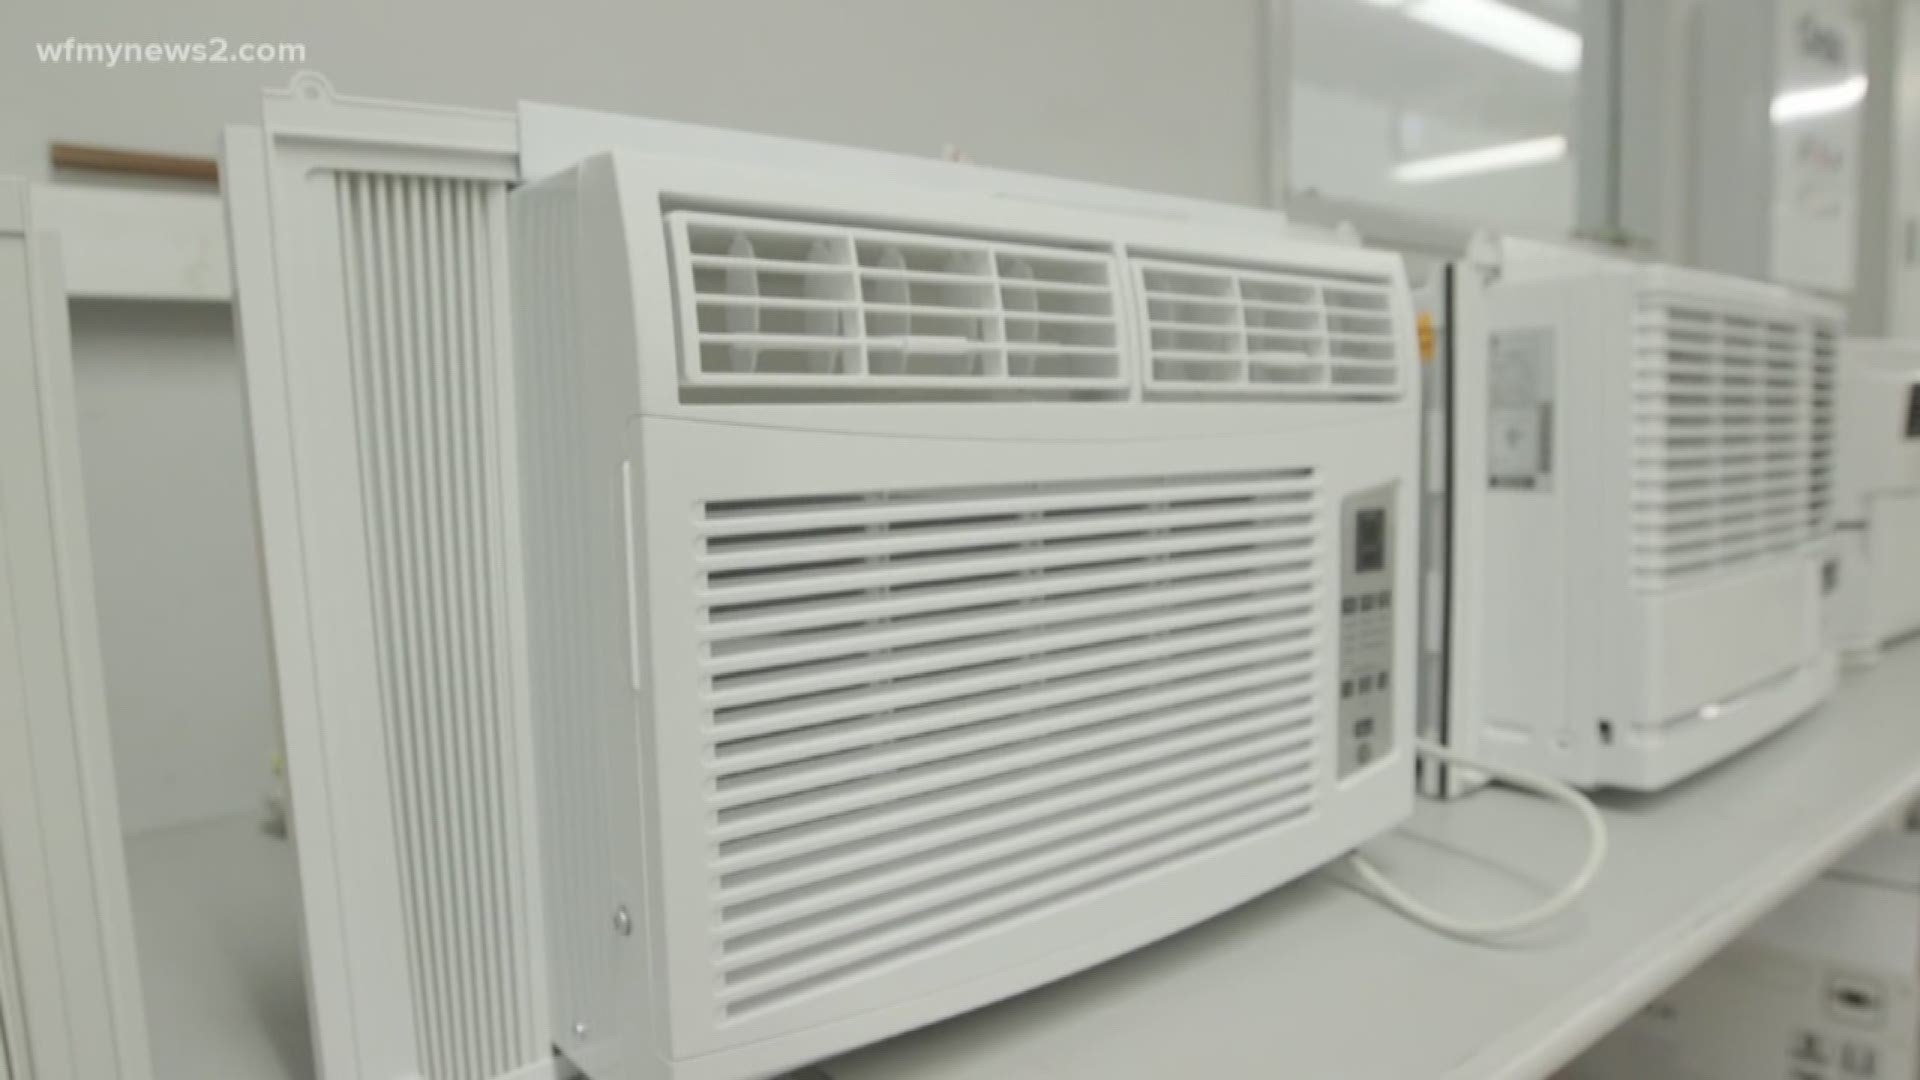 Consumer Reports tests window AC units in a special lab.